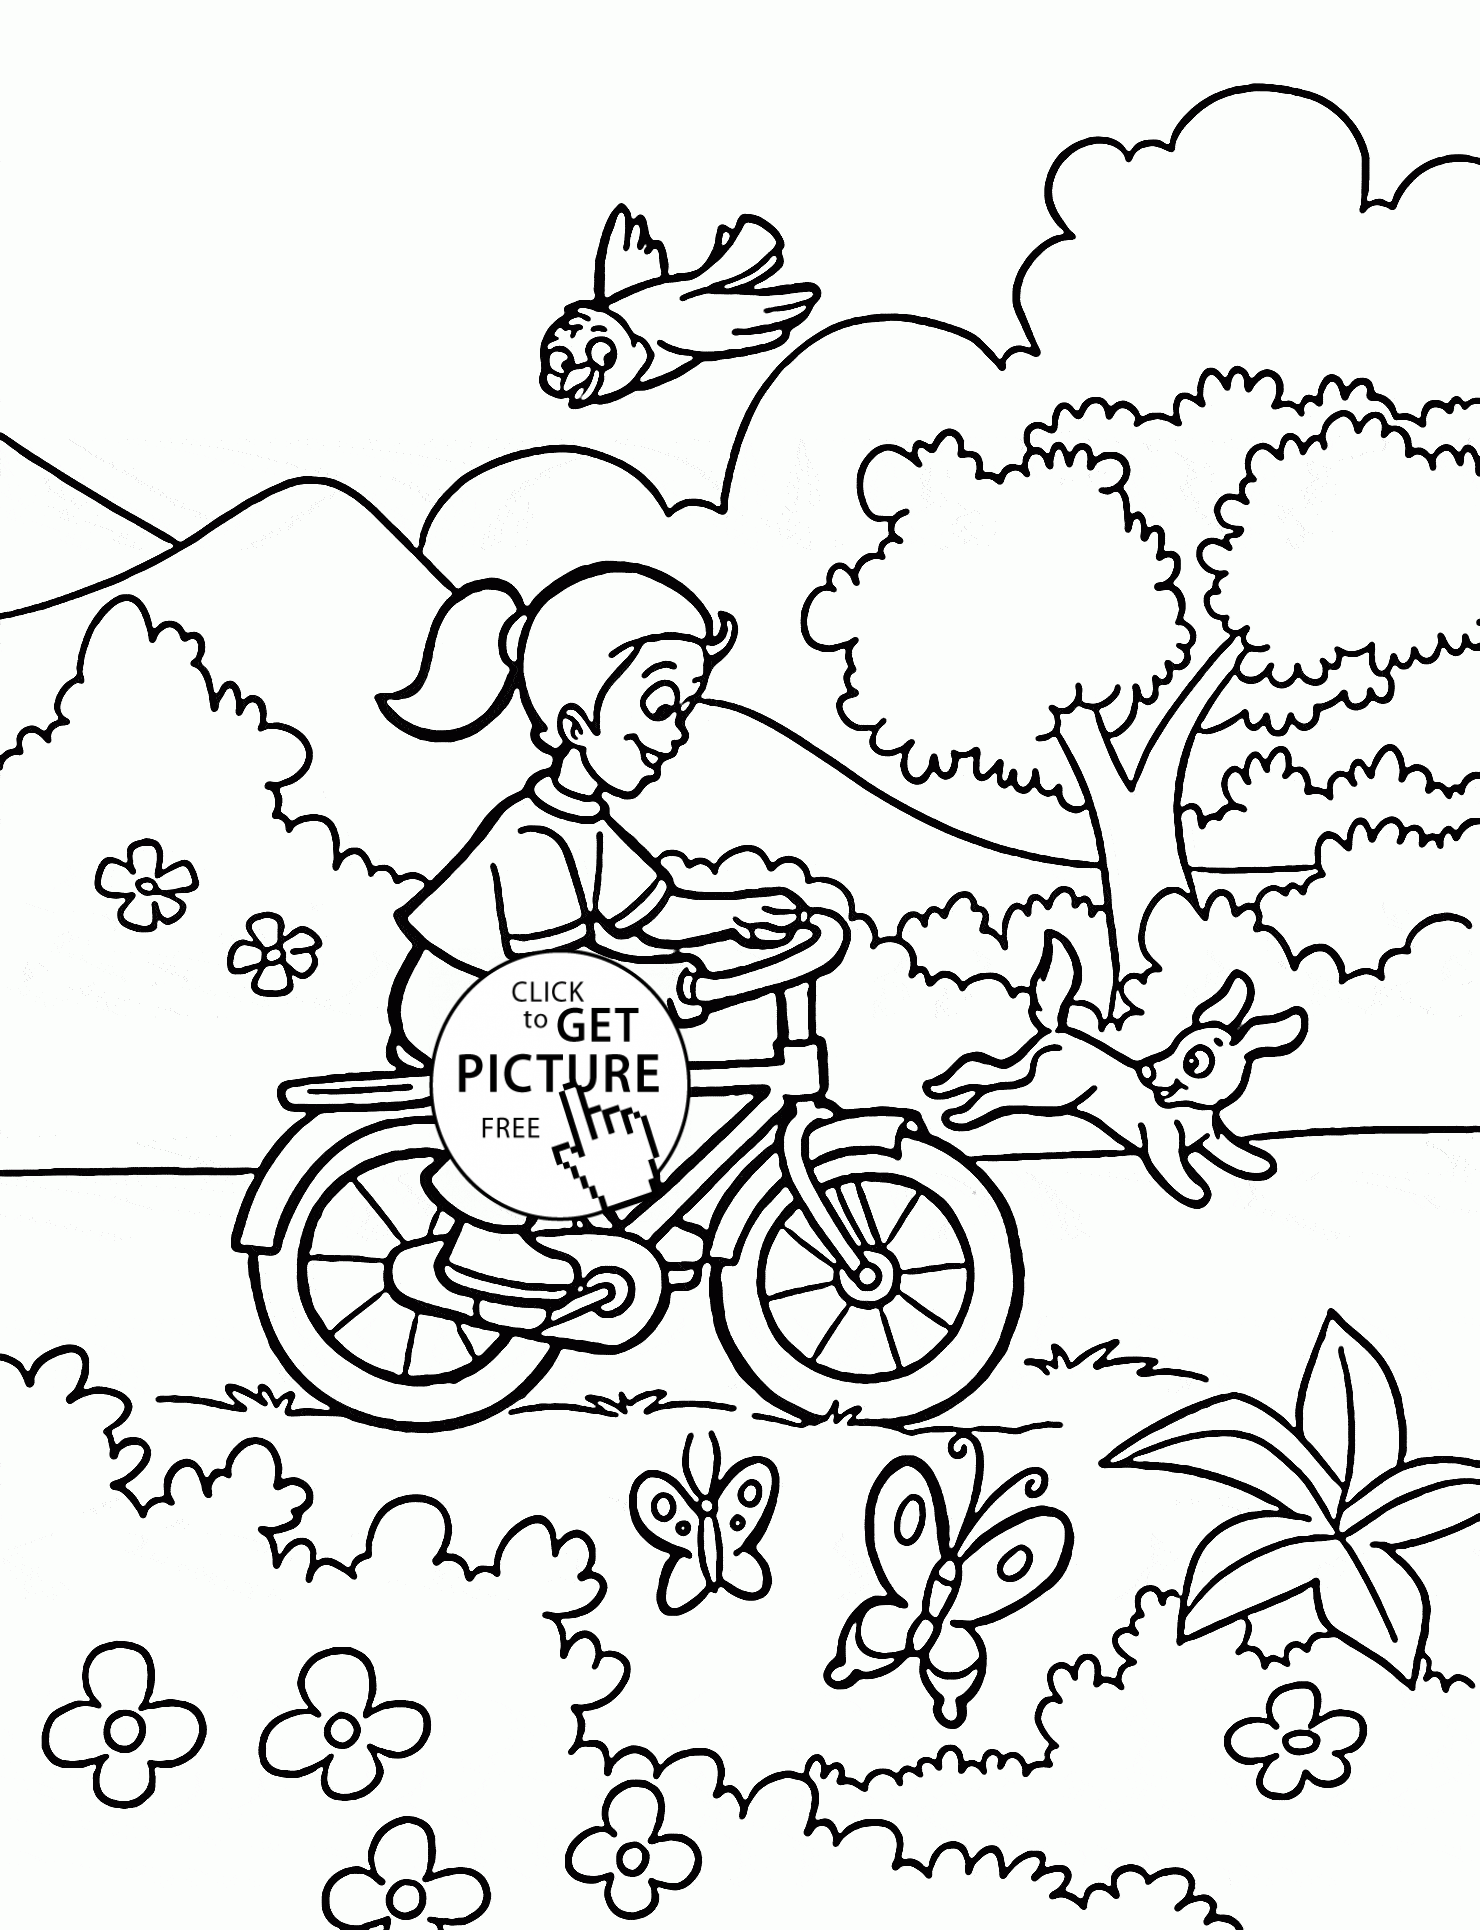 Girl rides a bicycle coloring page for kids, spring coloring pages ...